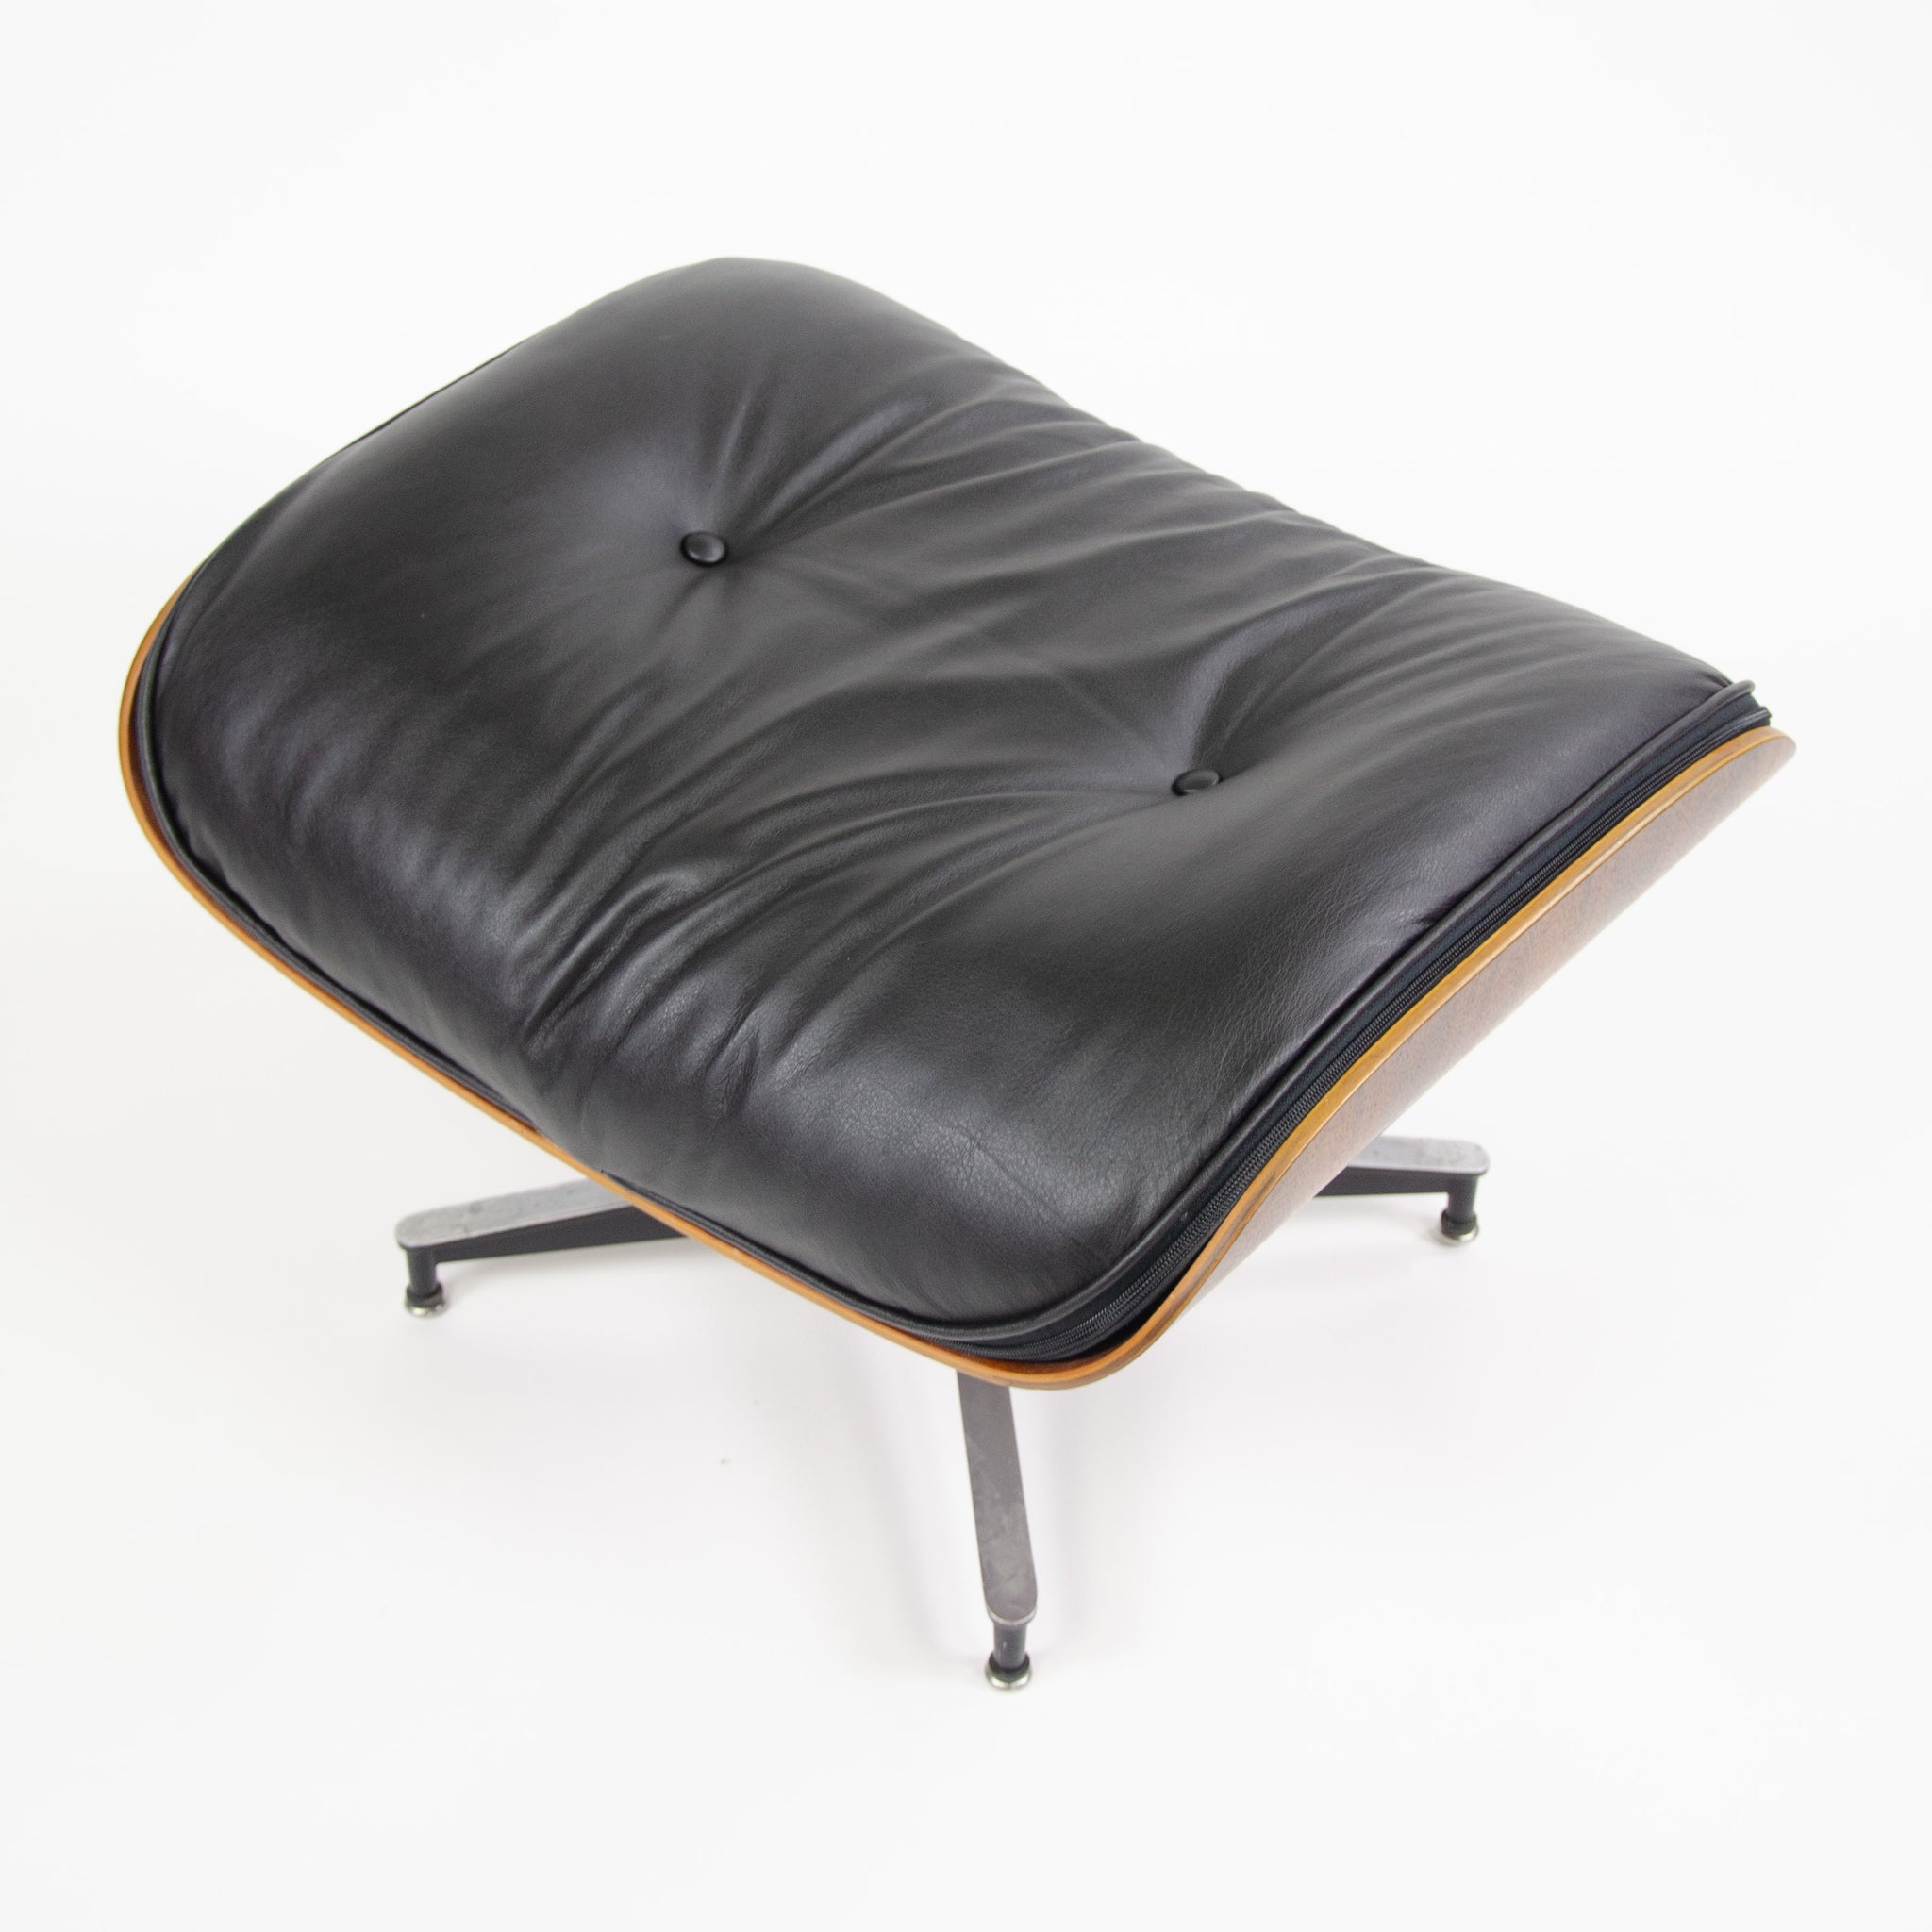 SOLD Herman Miller Eames Lounge Chair & Ottoman Rosewood 670 671 Black Leather 1970's